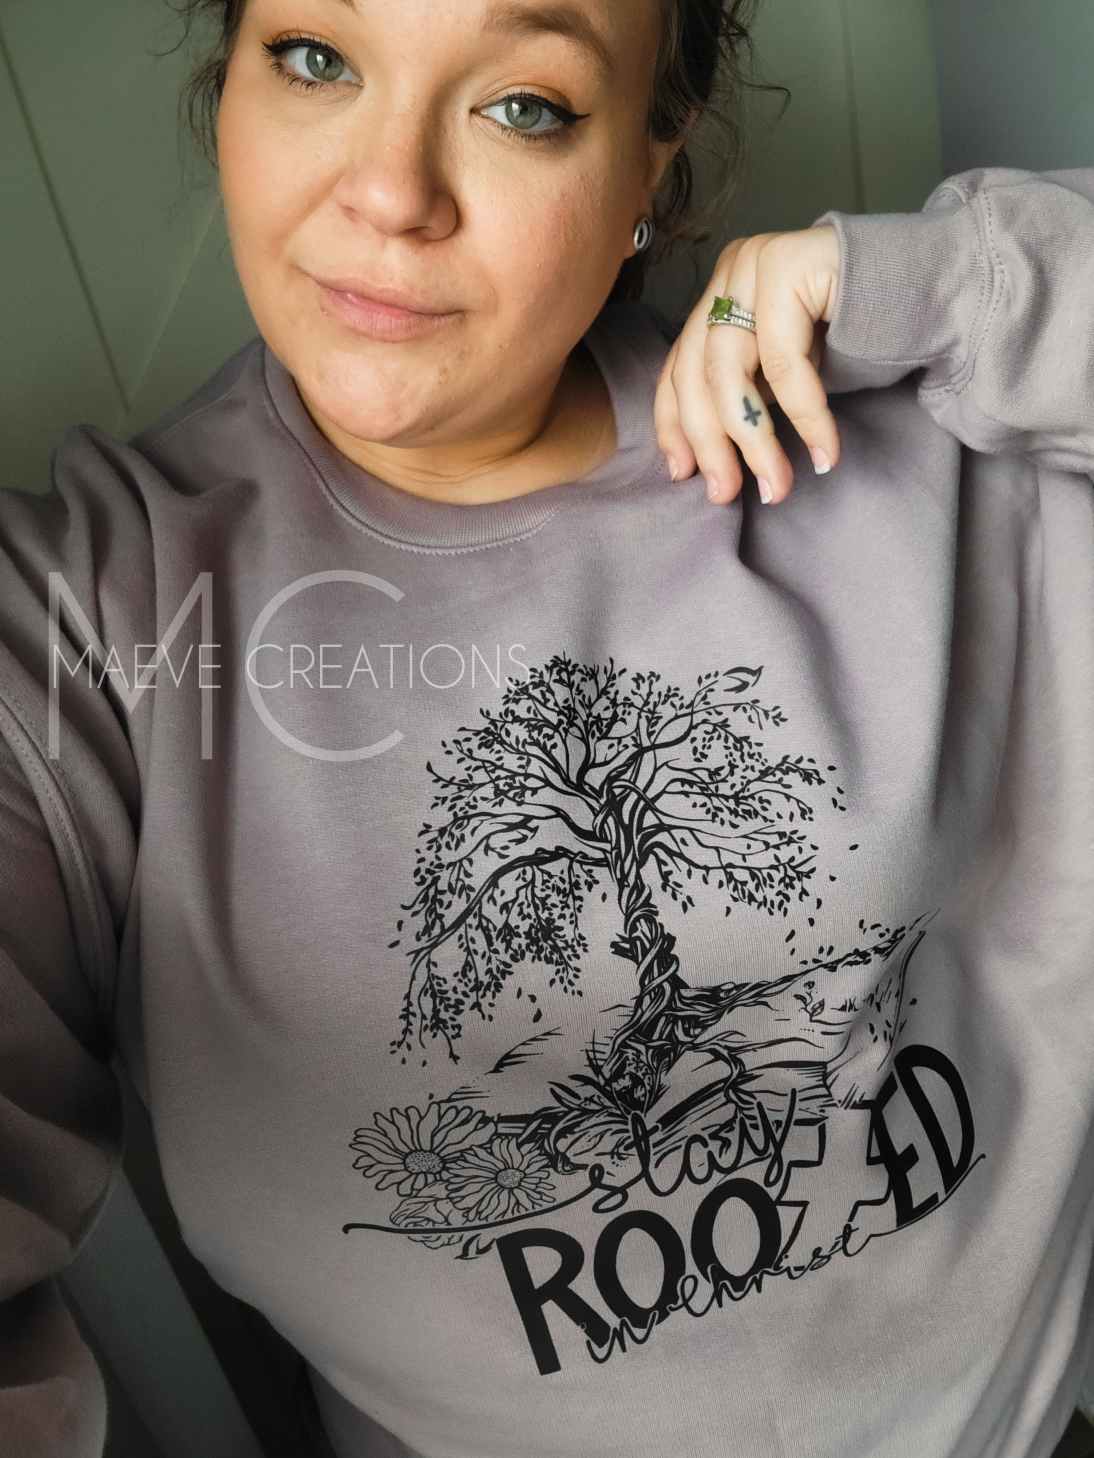 Stay Rooted in Christ Sweatshirt